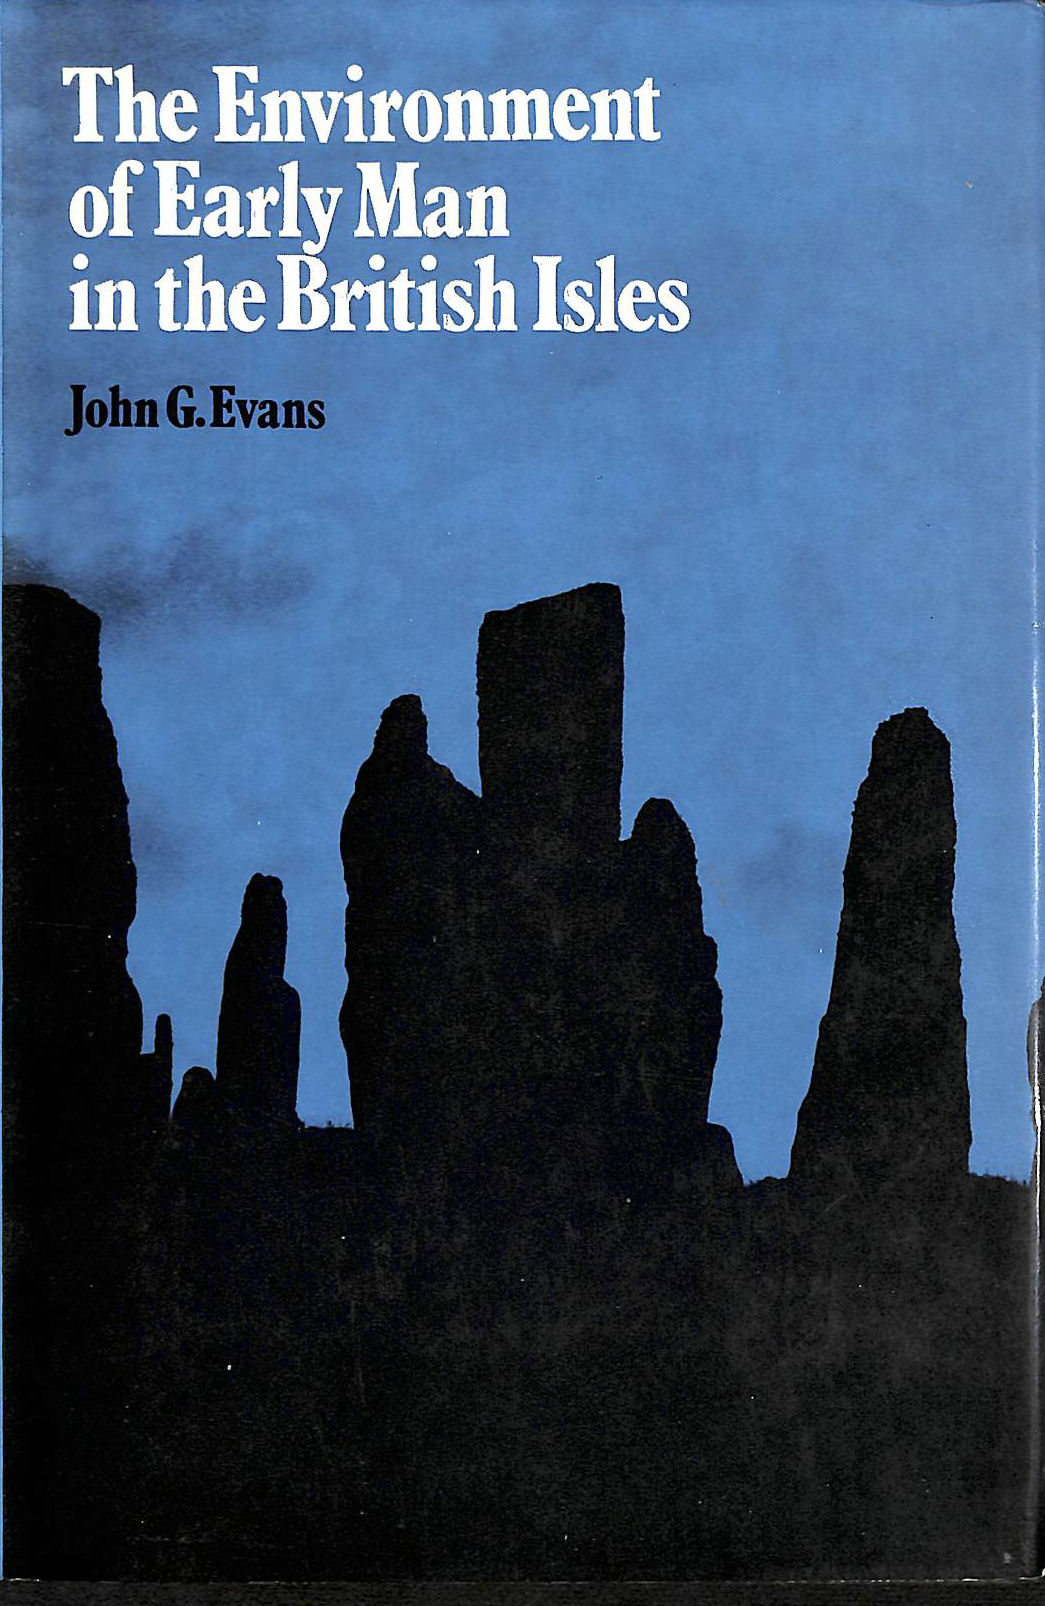 EVANS JOHN G - The Environment of Early Man in the British Isles